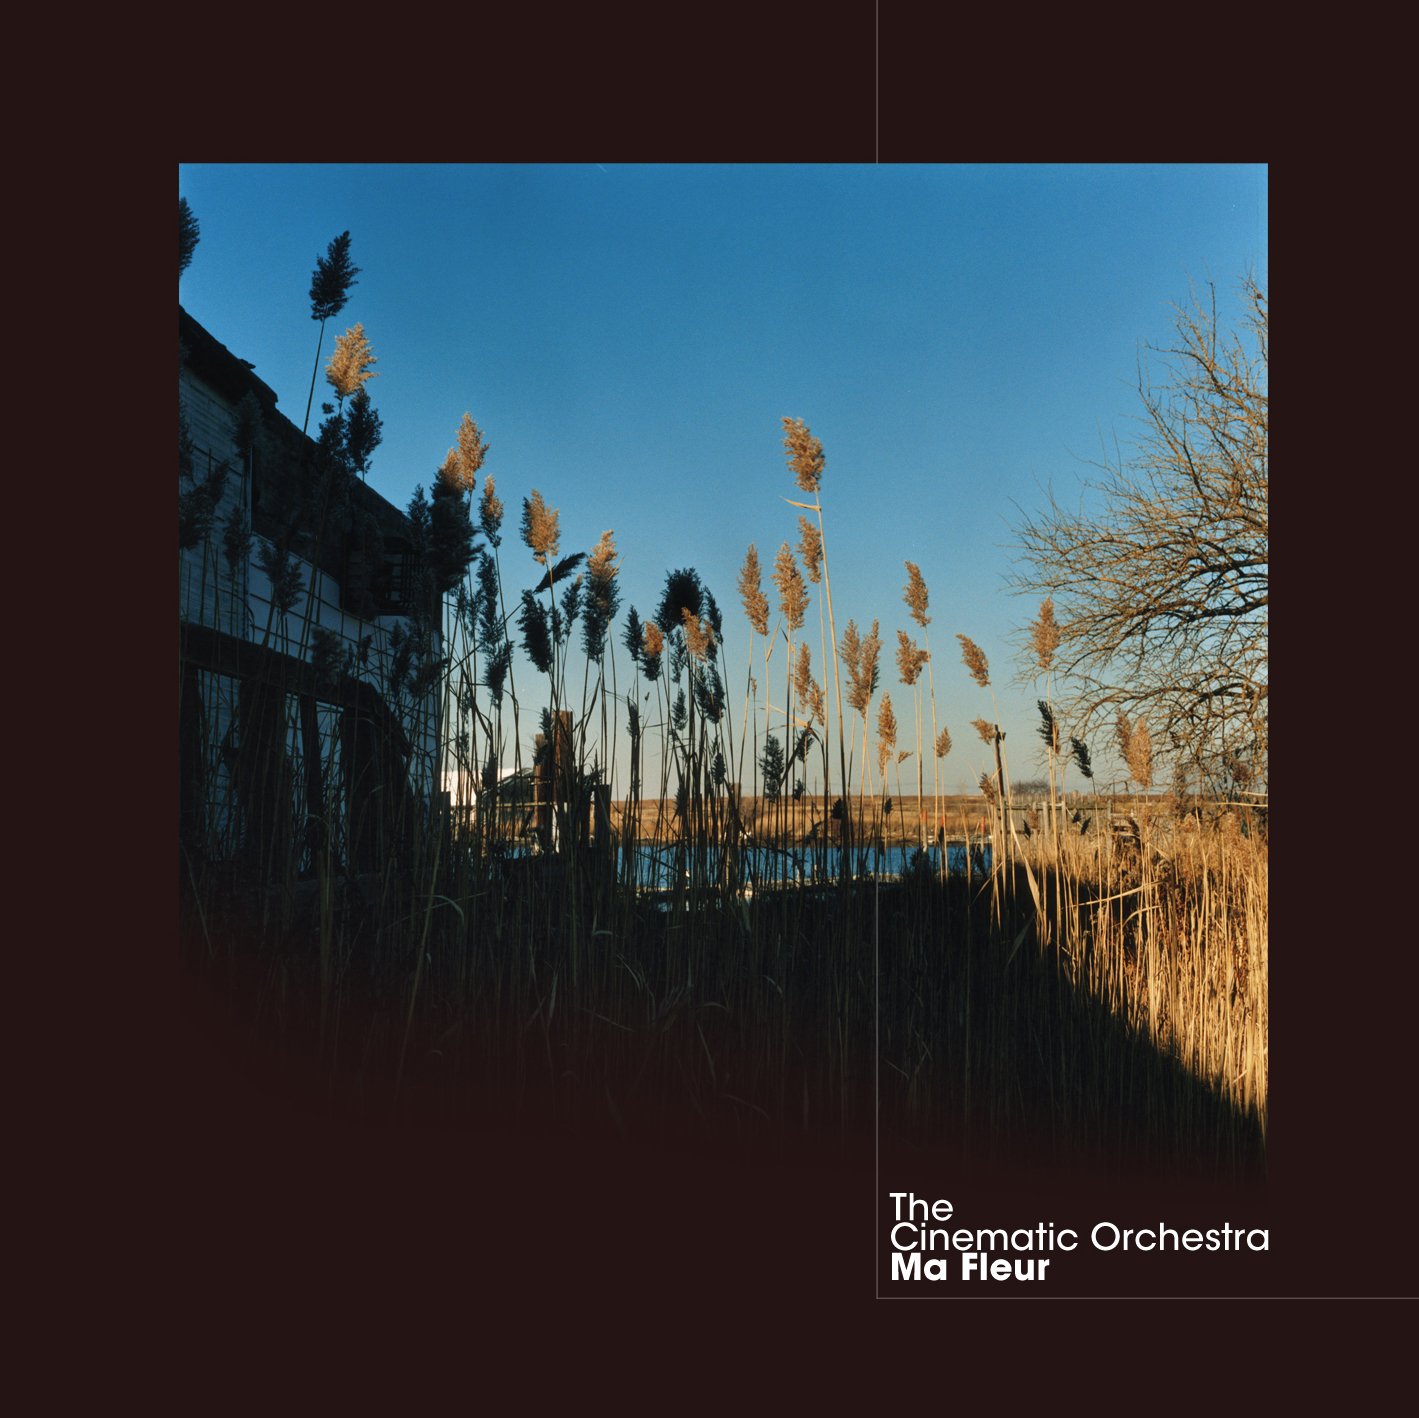 Cinematic orchestra to build. Cinematic Orchestra "ma fleur". The Cinematic Orchestra. Группа the Cinematic Orchestra. Cinematic Orchestra винил.